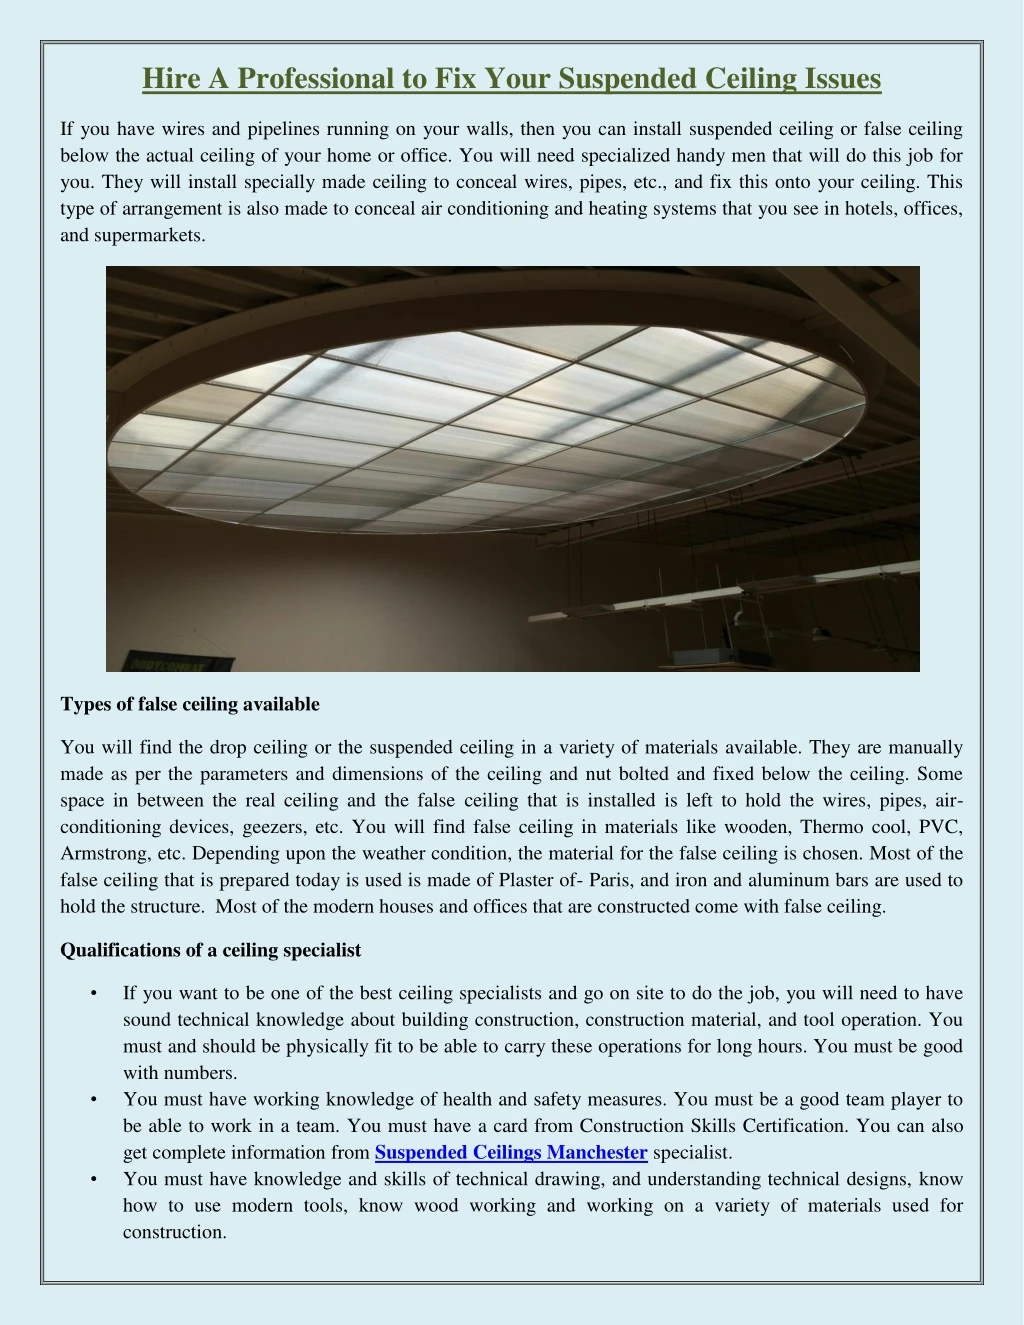 hire a professional to fix your suspended ceiling